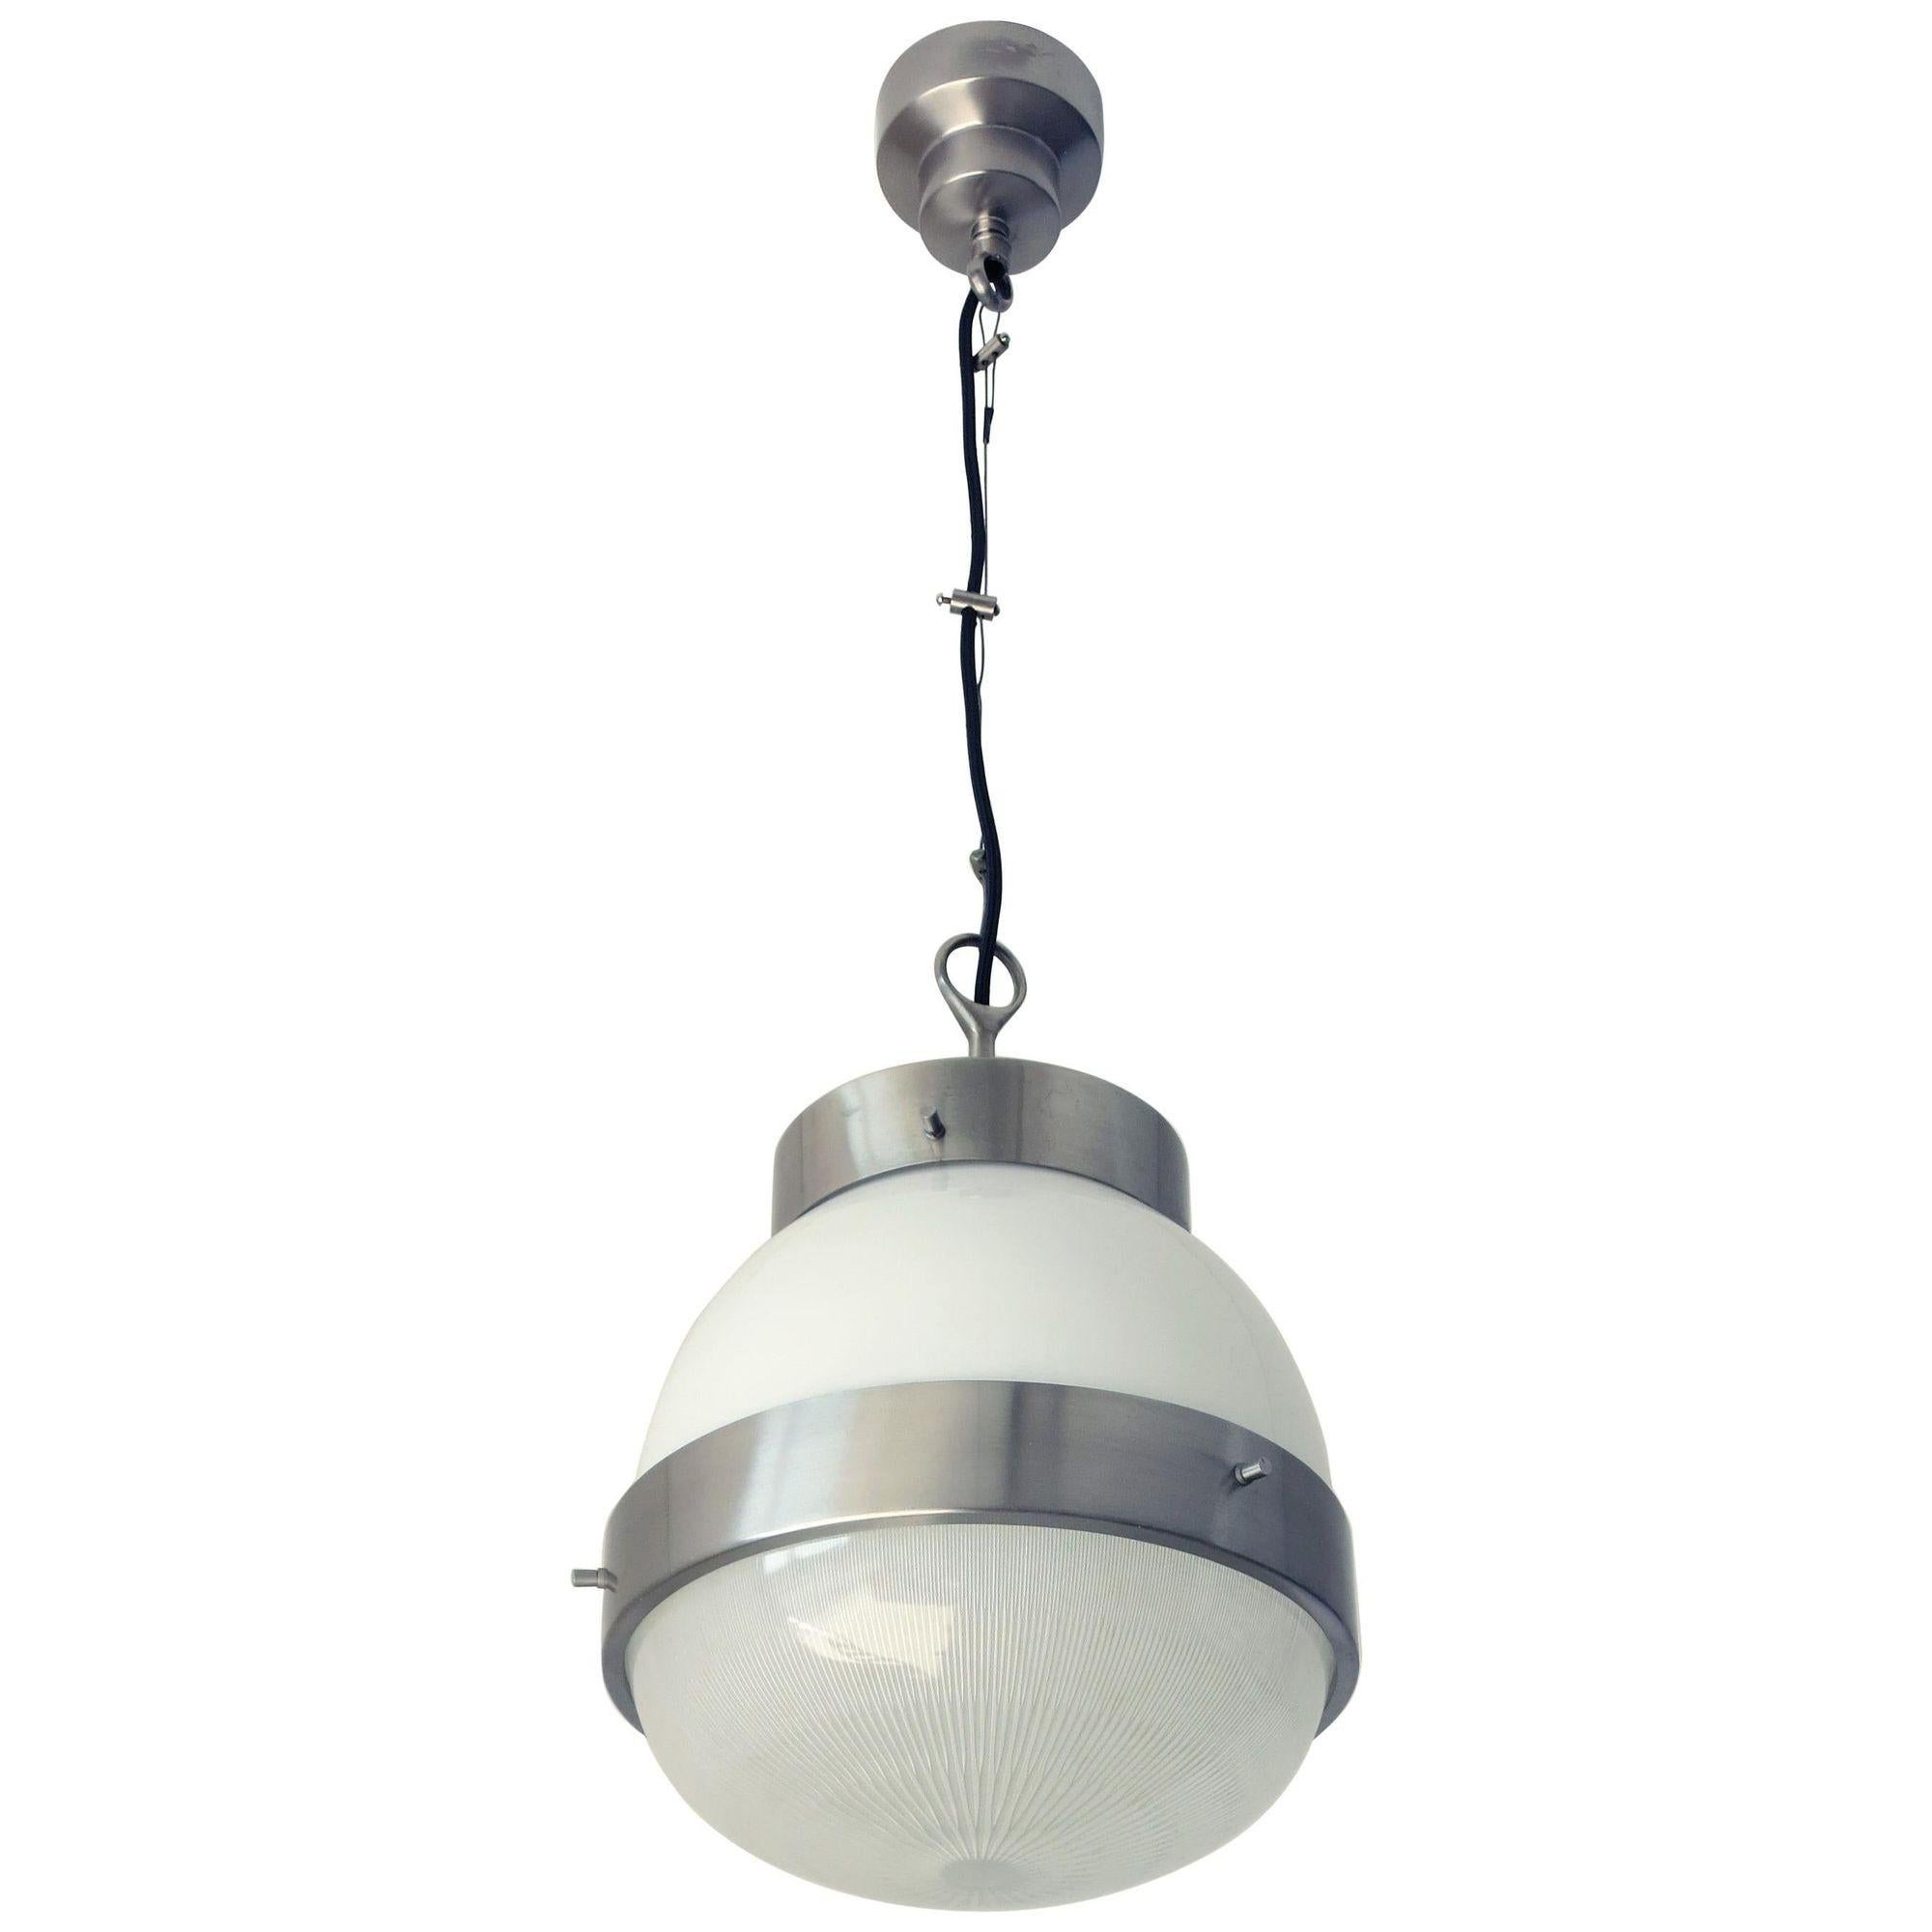 Vintage Italian pendant with frosted white and holophane glass on nickel frame. Designed by Sergio Mazza for Artemide in Italy, c. 1960's.
*Rewired to fit US Lighting Standards
*Chain height can be adjusted 
Dimensions:
15.75